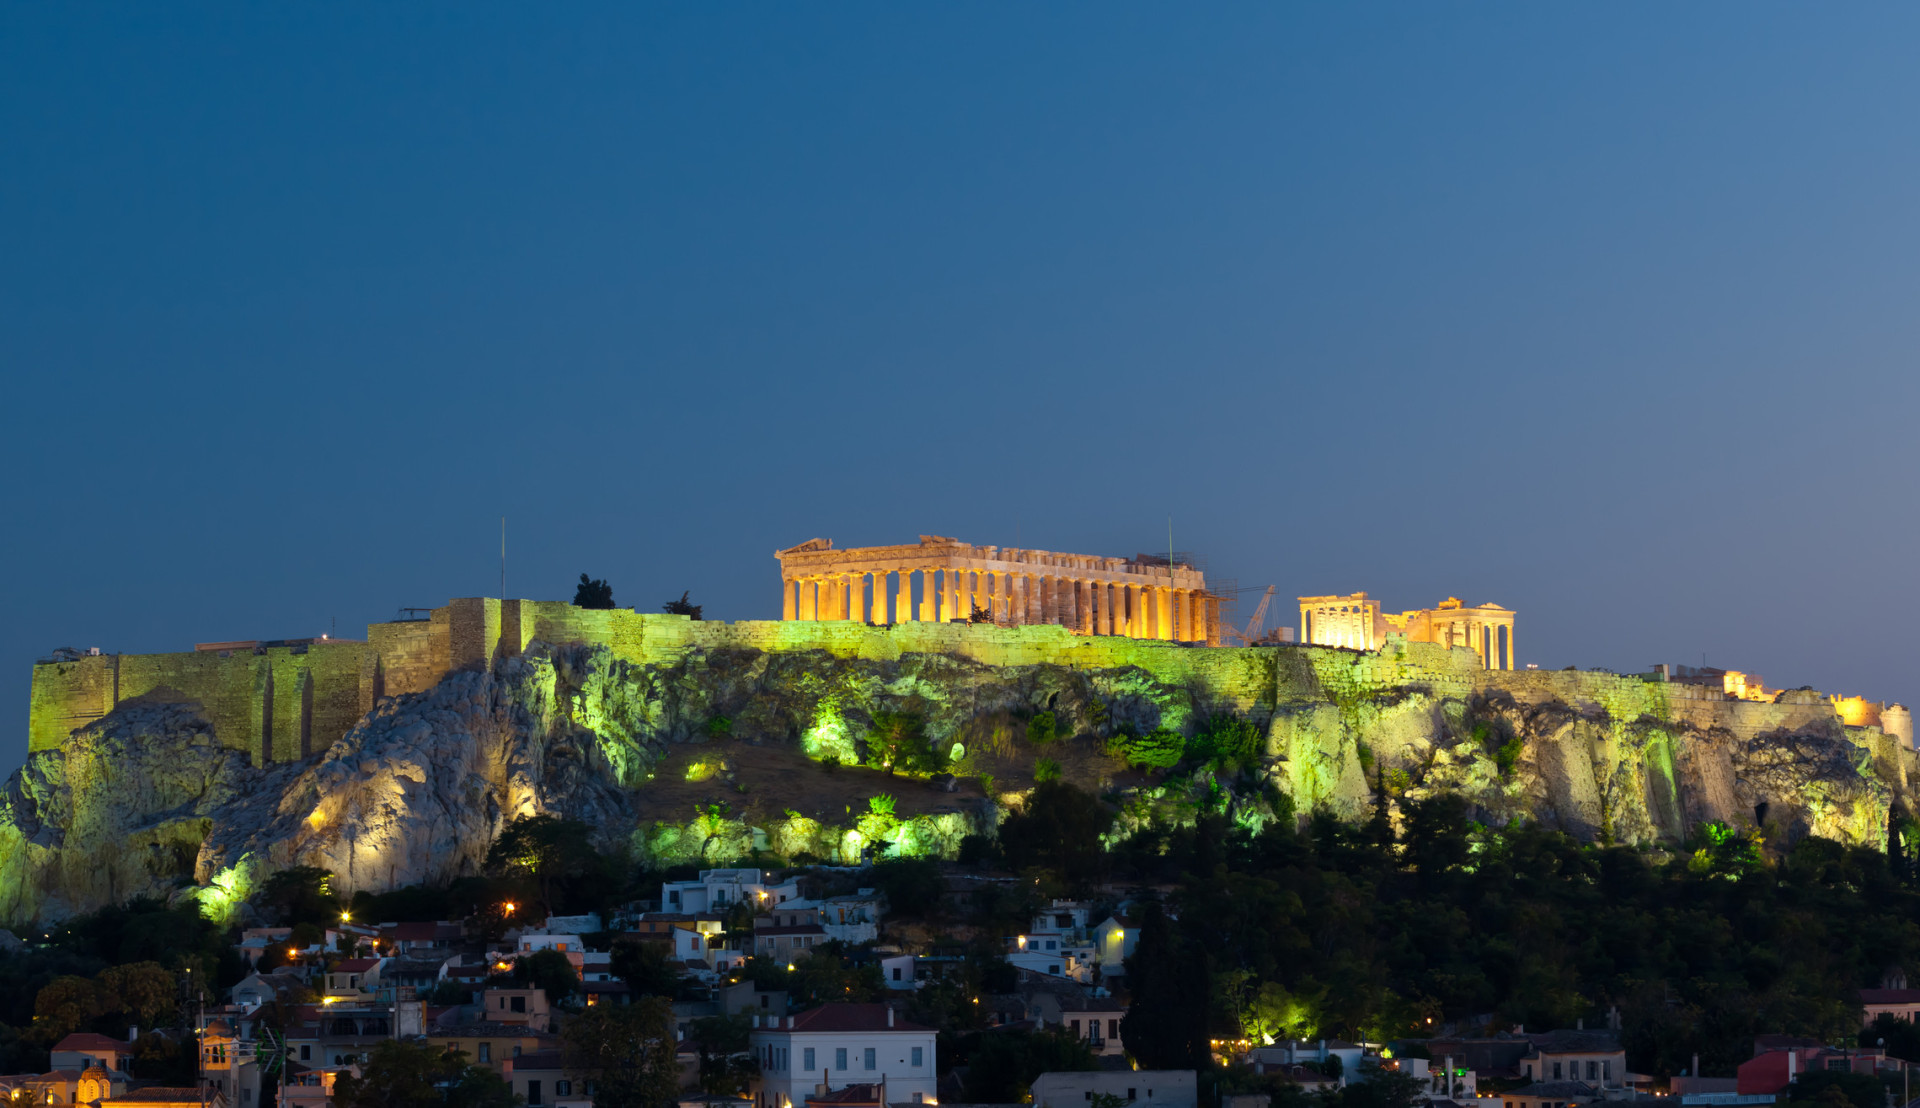 If you're looking for history and culture, then Athens is your place. Don't miss out on the National Archaeological Museum, plus the famous Acropolis, a UNESCO World Heritage site.<p><a href="https://www.msn.com/en-us/community/channel/vid-7xx8mnucu55yw63we9va2gwr7uihbxwc68fxqp25x6tg4ftibpra?cvid=94631541bc0f4f89bfd59158d696ad7e">Follow us and access great exclusive content every day</a></p>